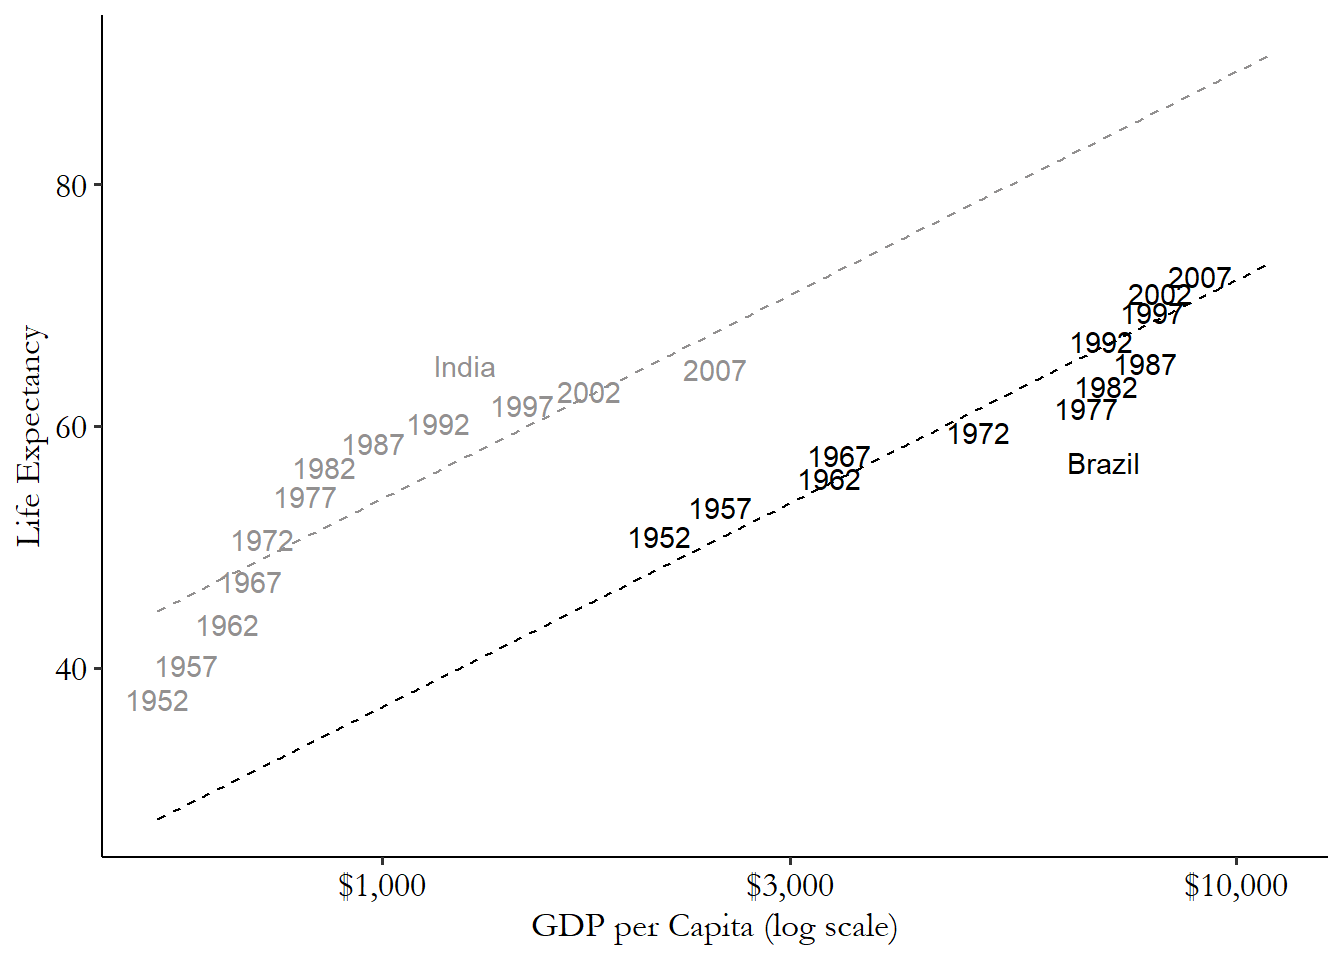 Graph showing life expectancy and GDP per capita for Brazil and India over time. Two lines with the same slope but different intercepts, have been overlaid for the two countries.